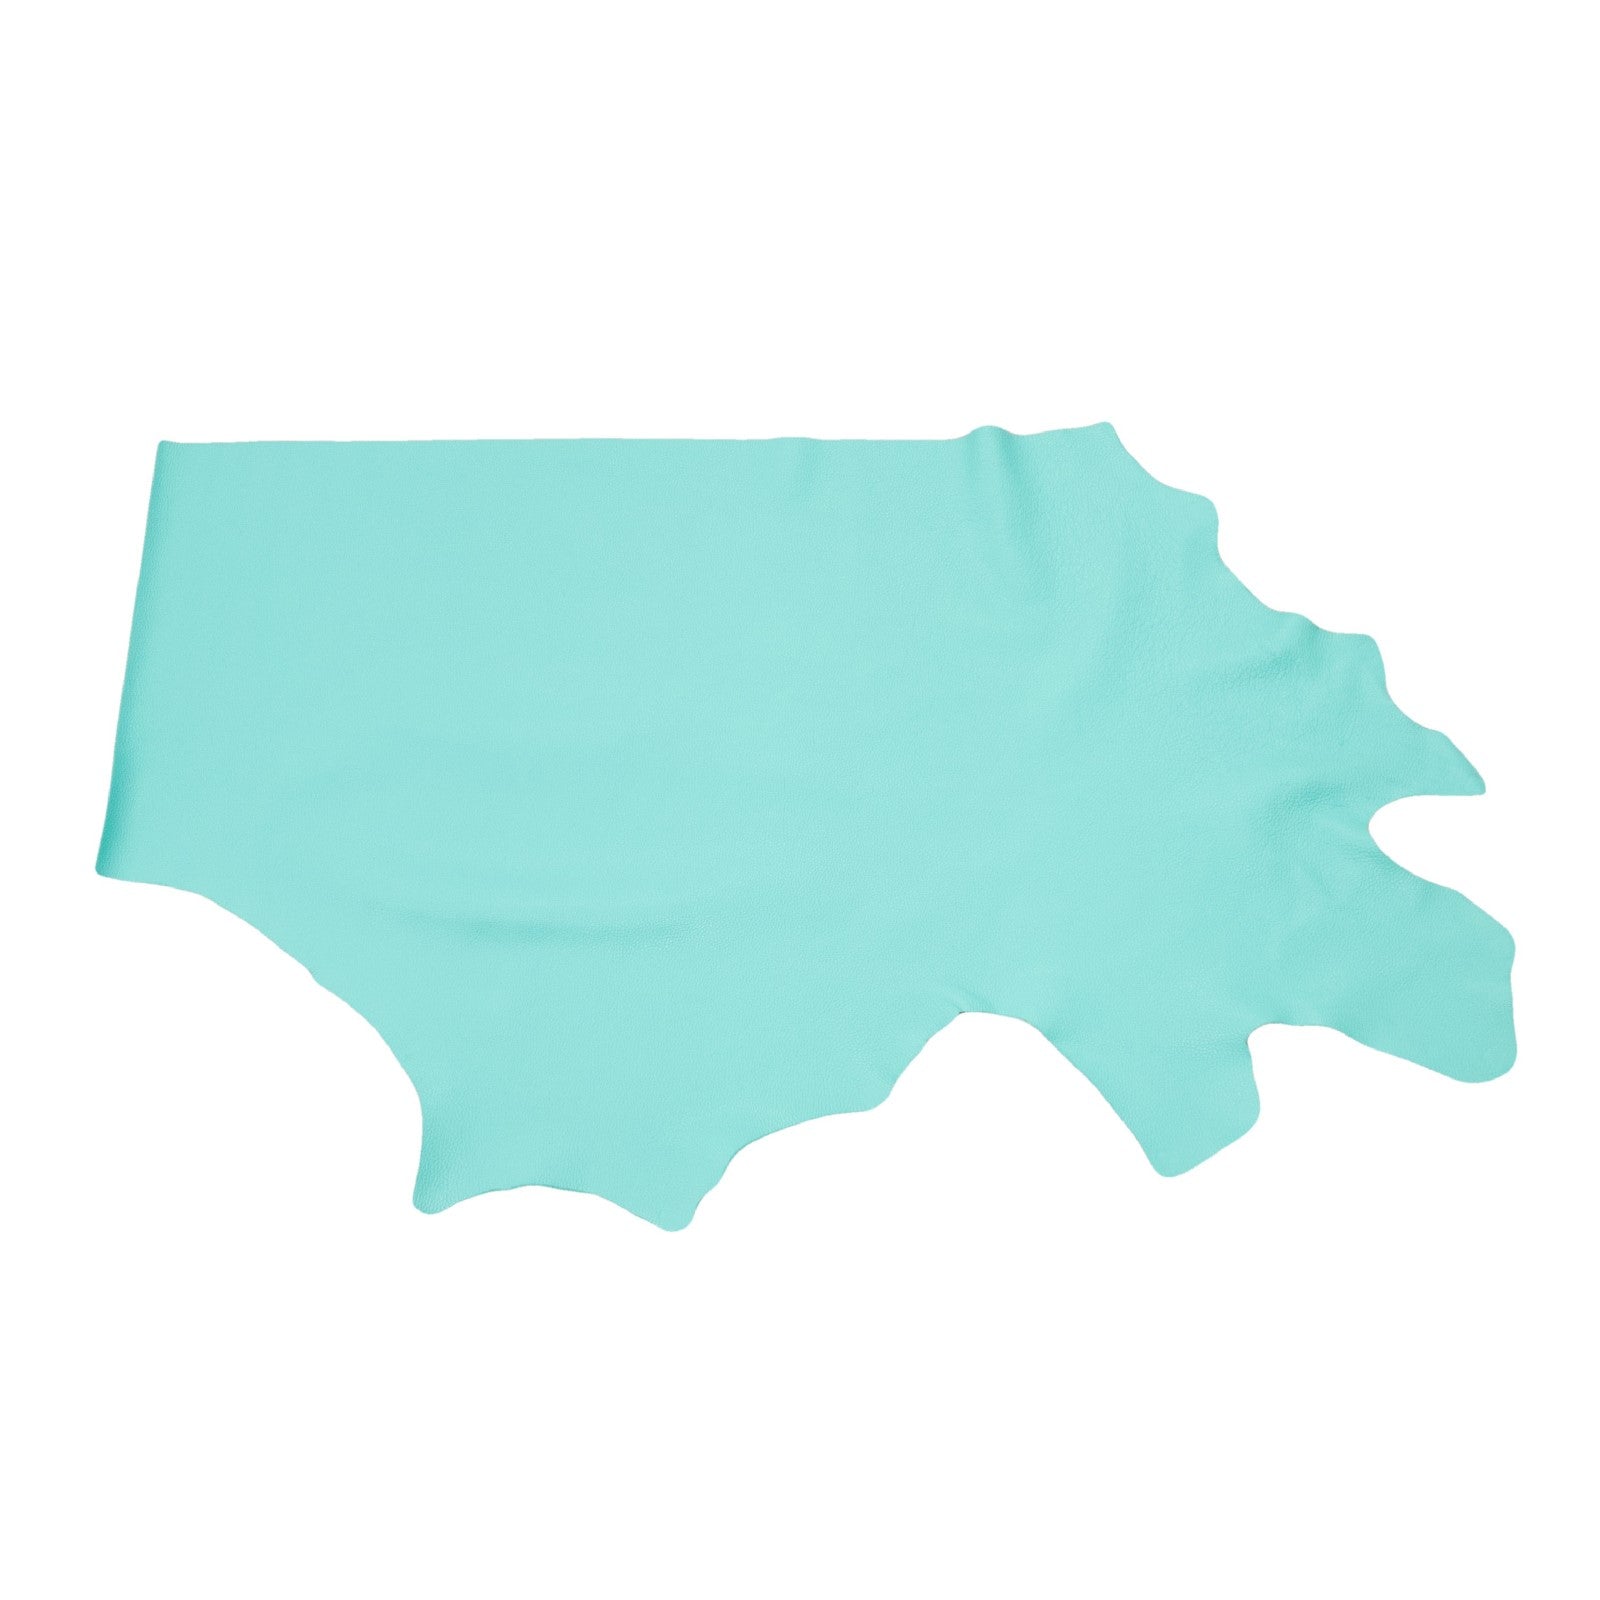 Tucson Turquoise Tried n True 3-4 oz Leather Cow Hides, 6.5-7.5 Square Foot / Project Piece (Bottom) | The Leather Guy